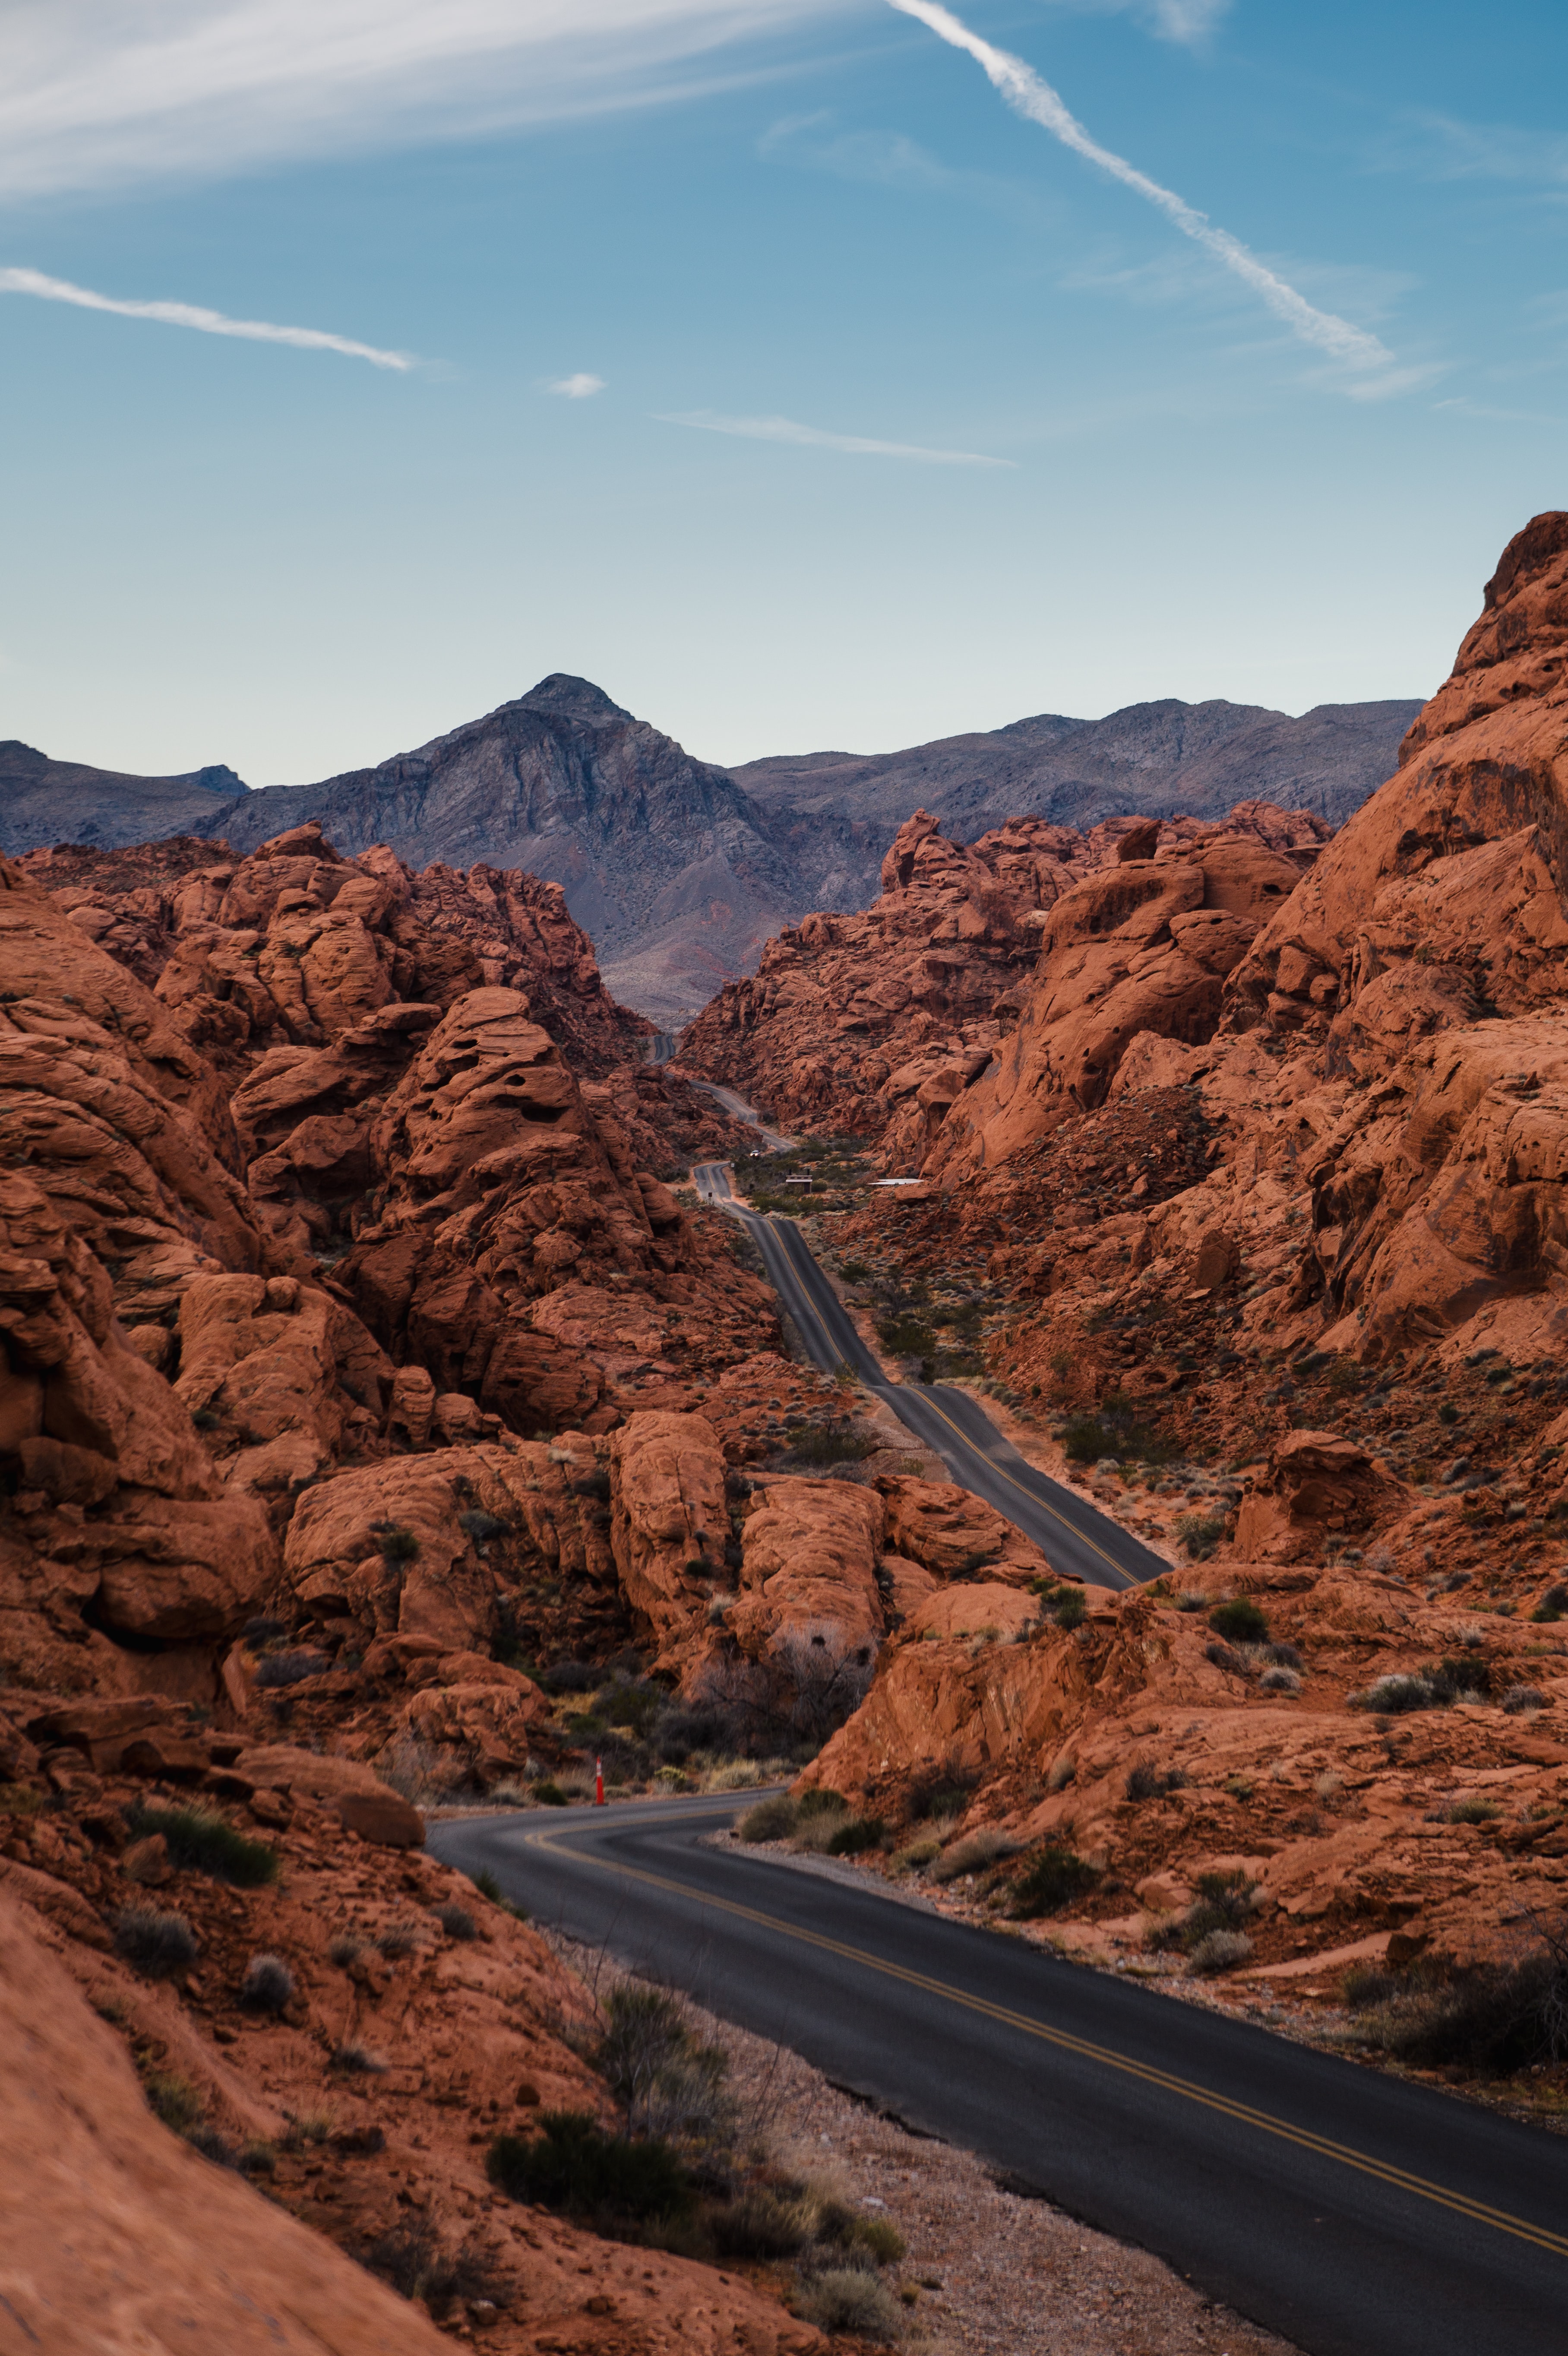 android rocks, nature, mountains, road, winding, sinuous, sandy